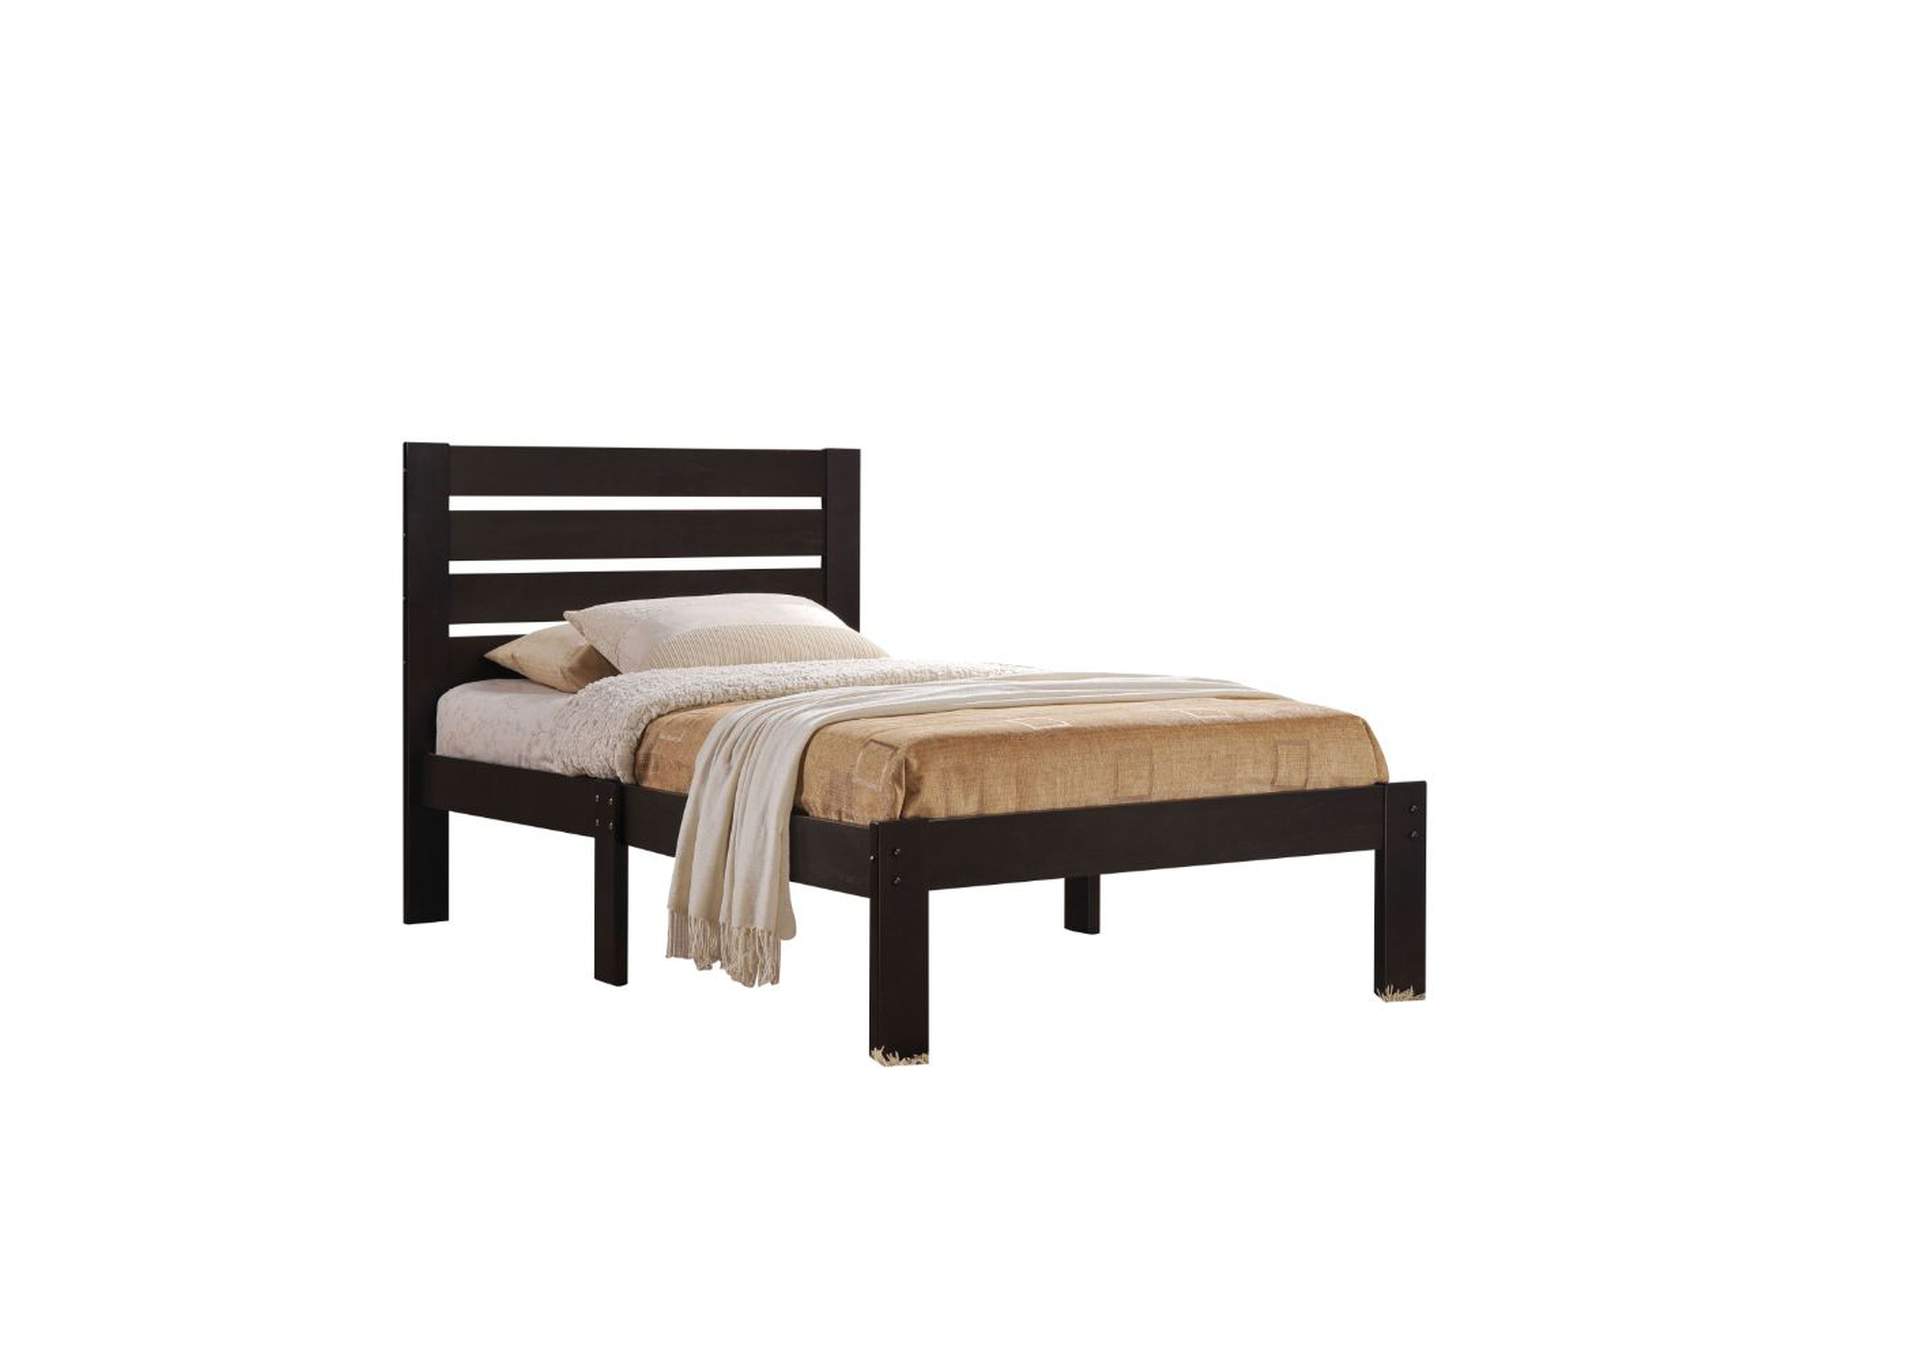 Kenney Espresso Twin Bed,Acme